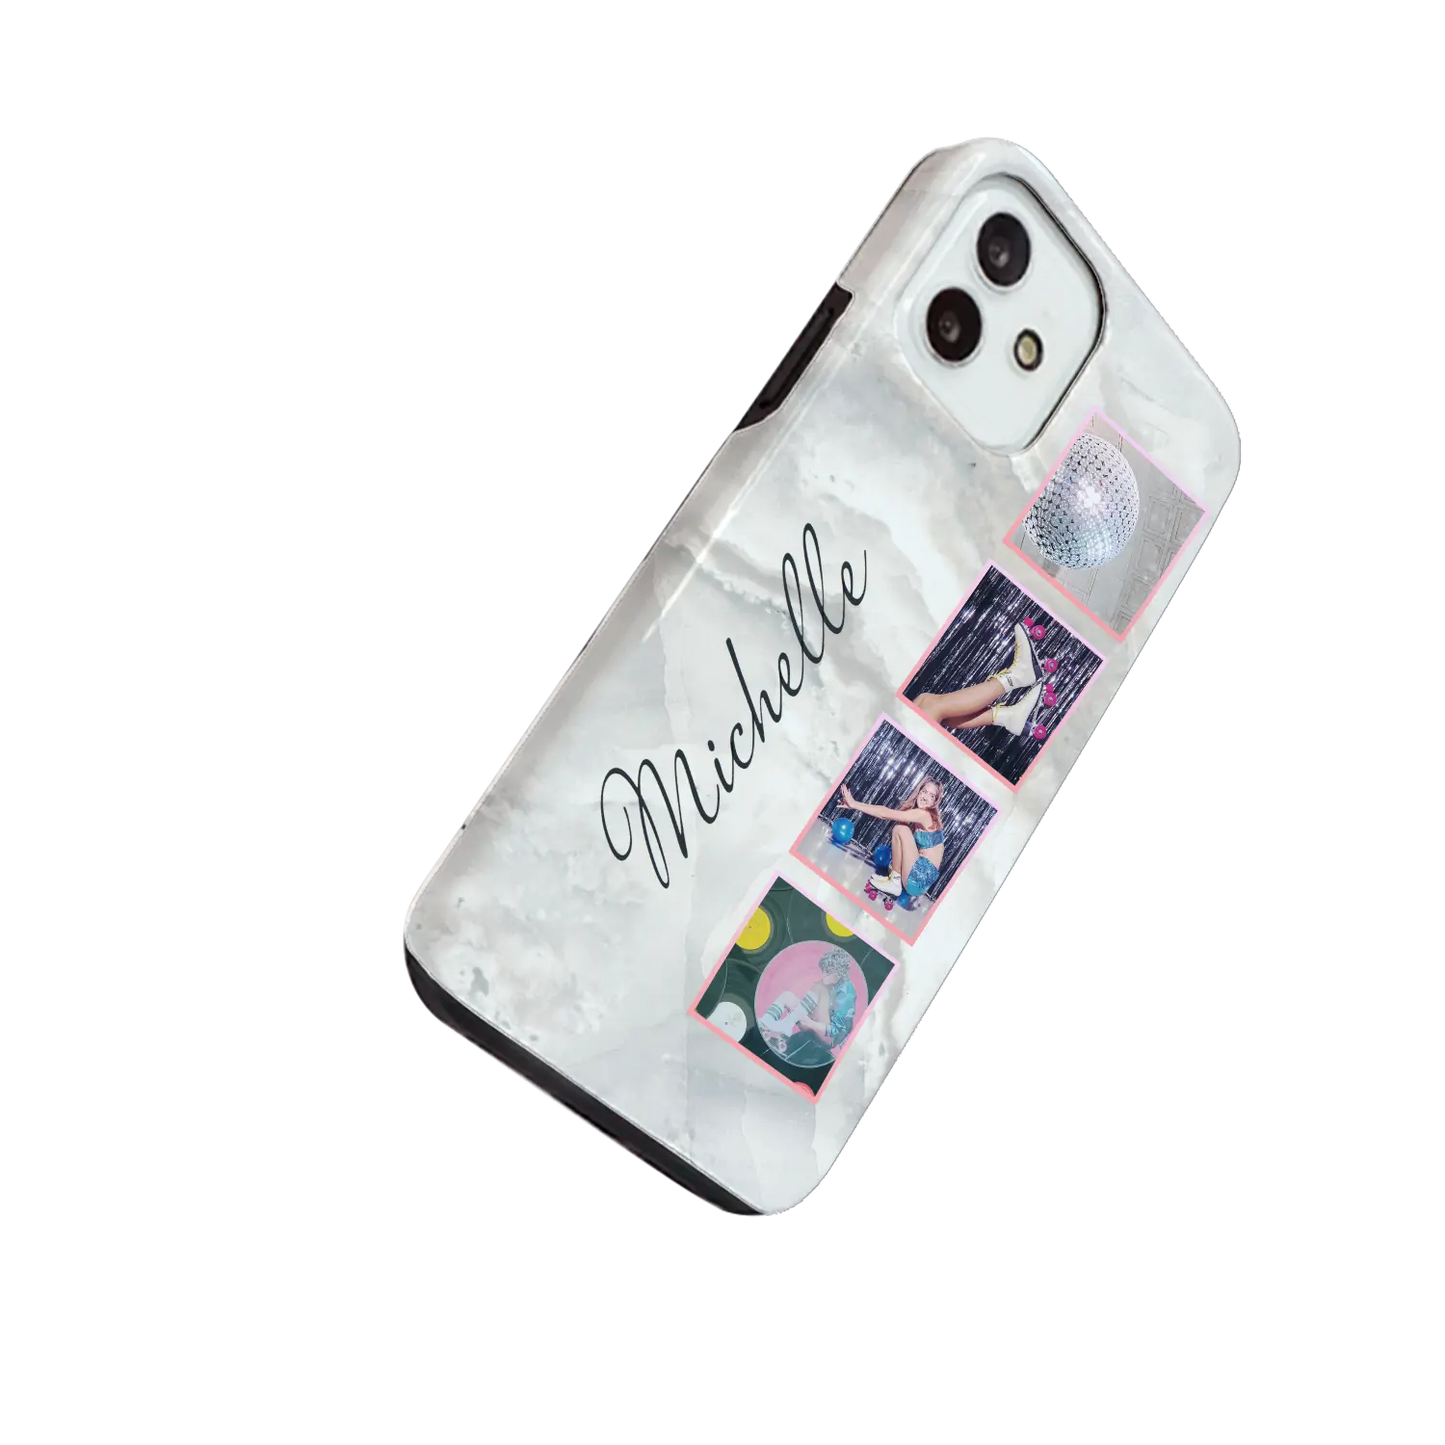 Photo Booth - Personalised iPhone Case